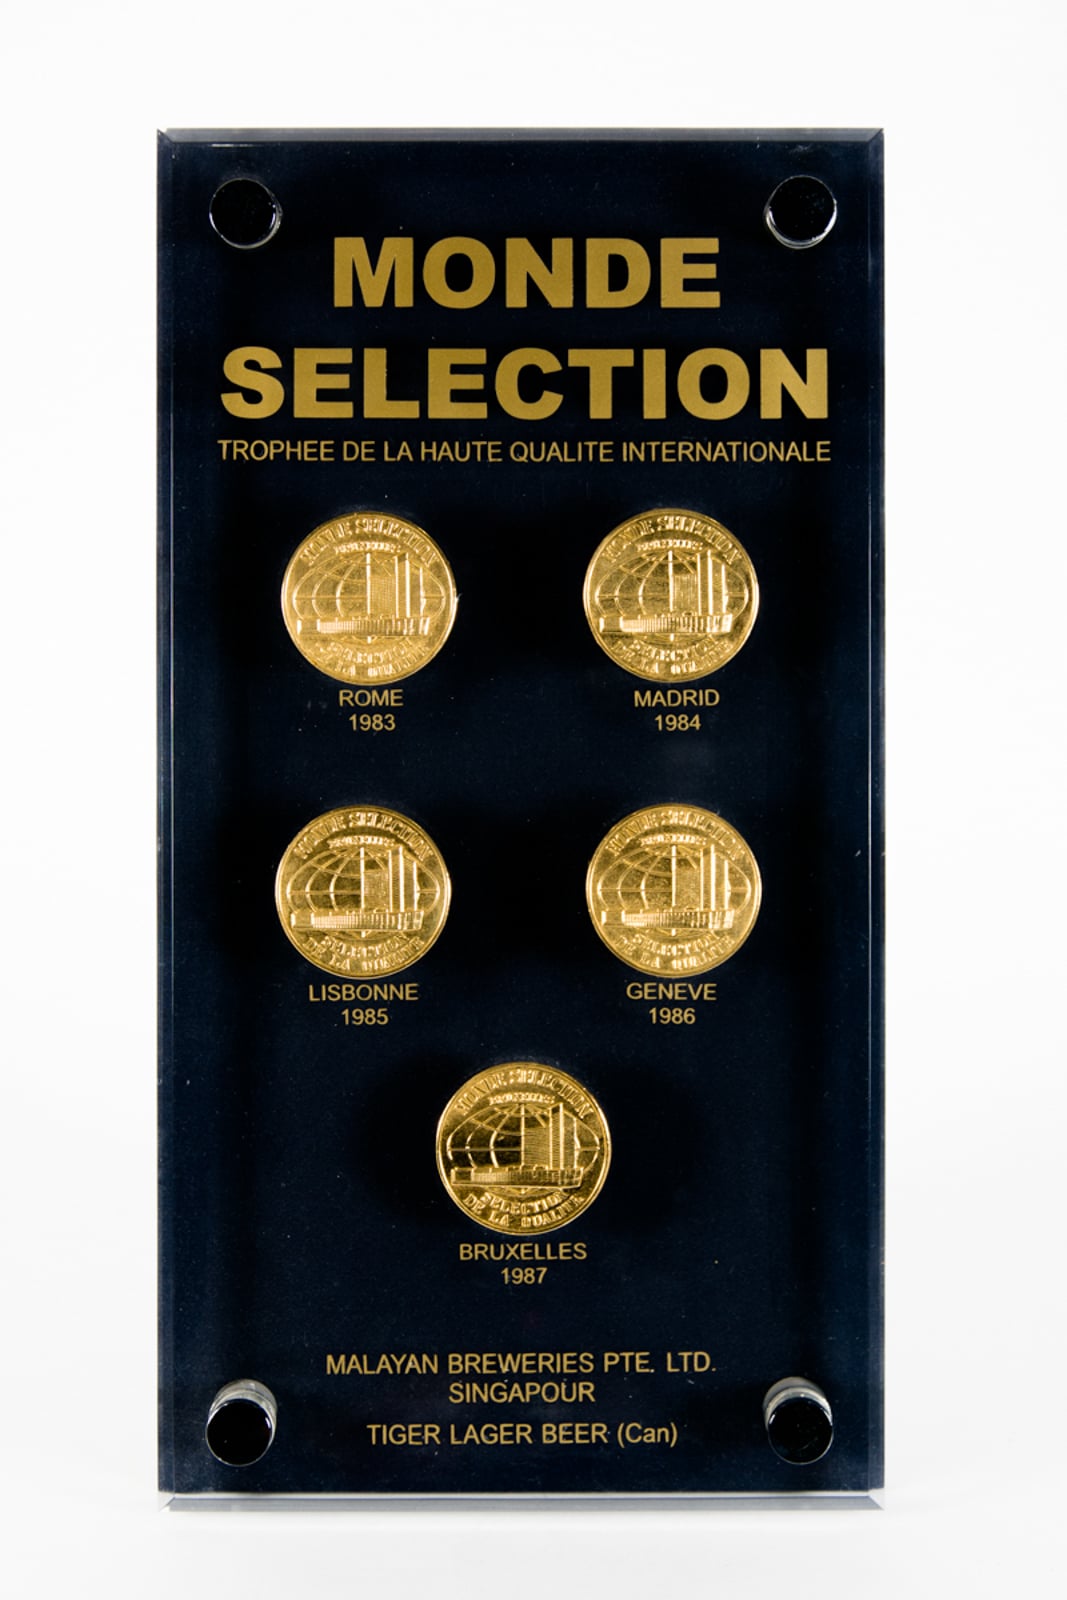 Monde Selection, Tiger Lager Beer (Can) 5 Medals